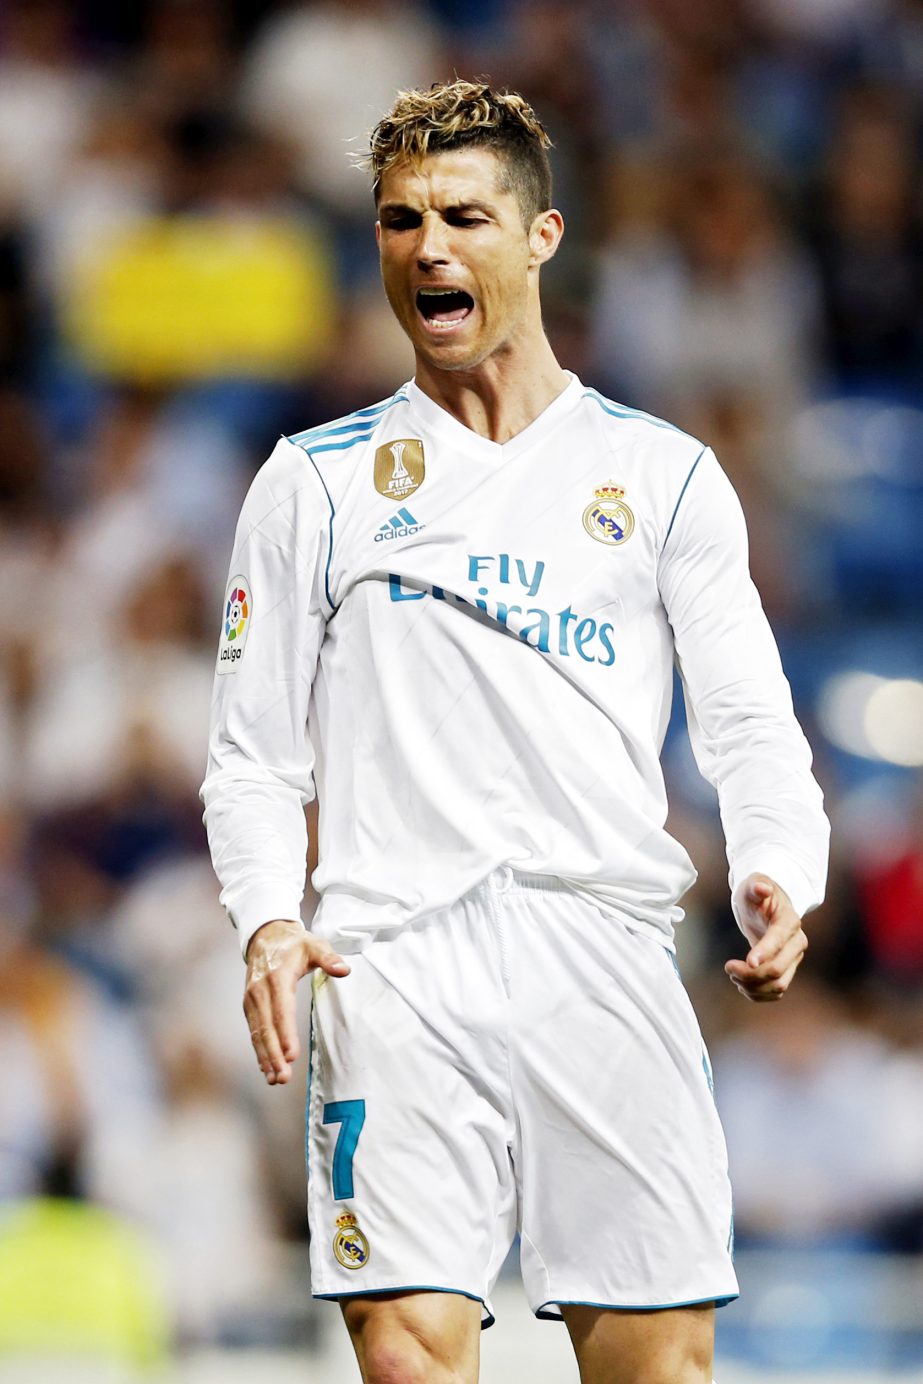 Real Madrid's Cristiano Ronaldo gestures during a Spanish La Liga soccer match between Real Madrid and Athletic Bilbao at the Santiago Bernabeu stadium in Madrid on Wednesday.